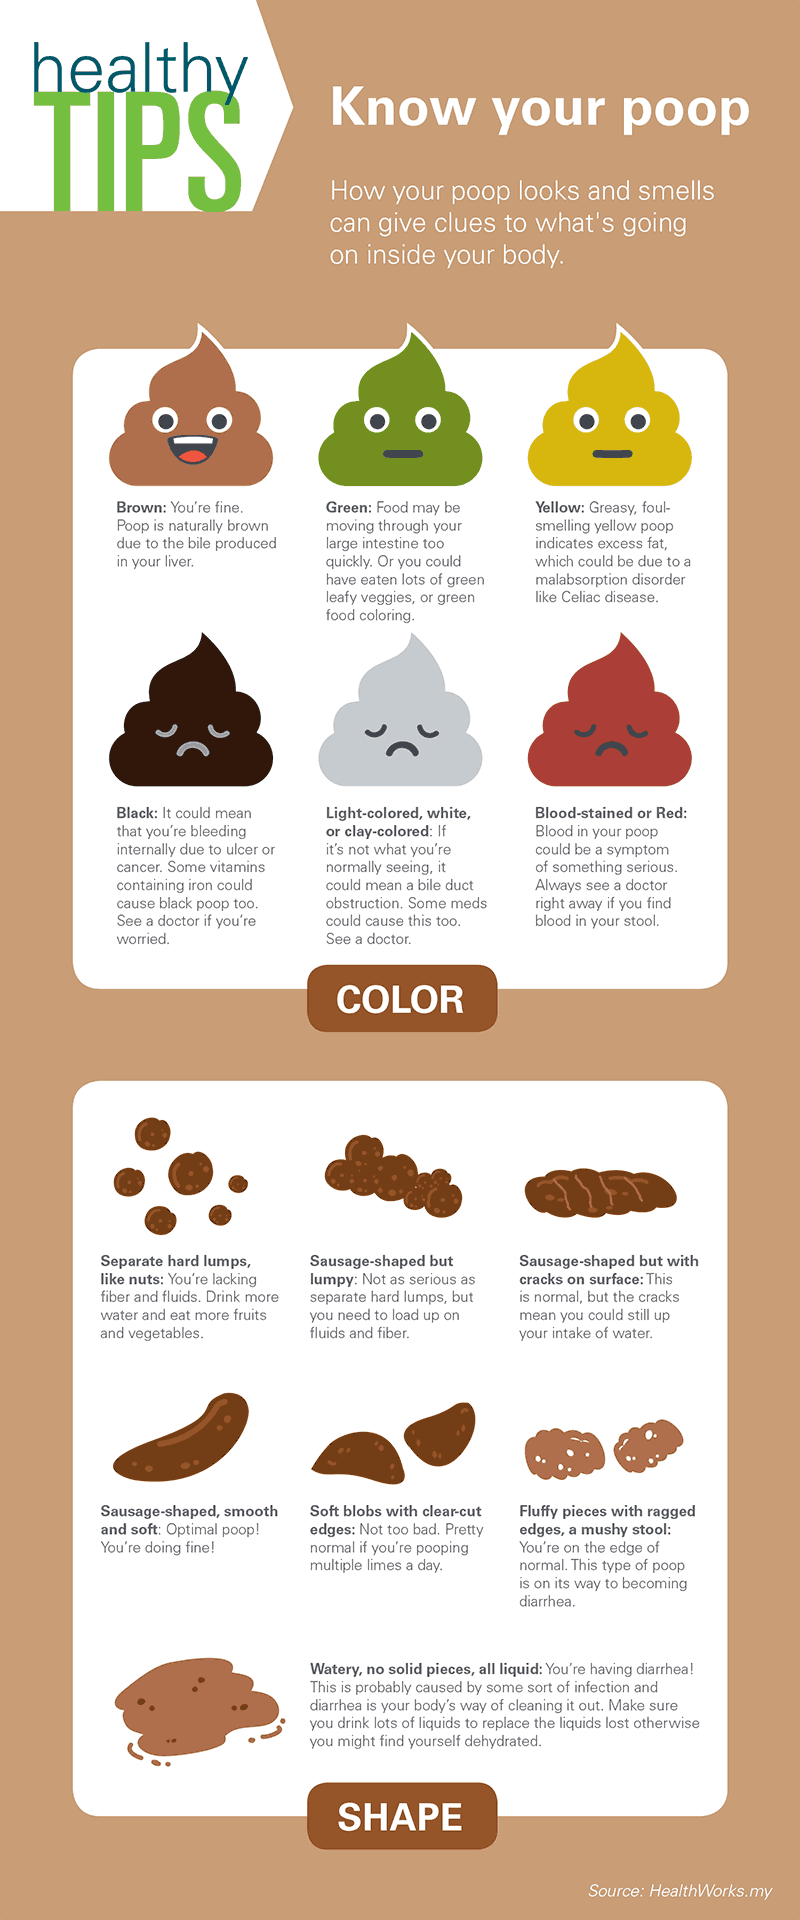 Bad stool colors: Stool Color Changes and Chart: What Does It Mean?